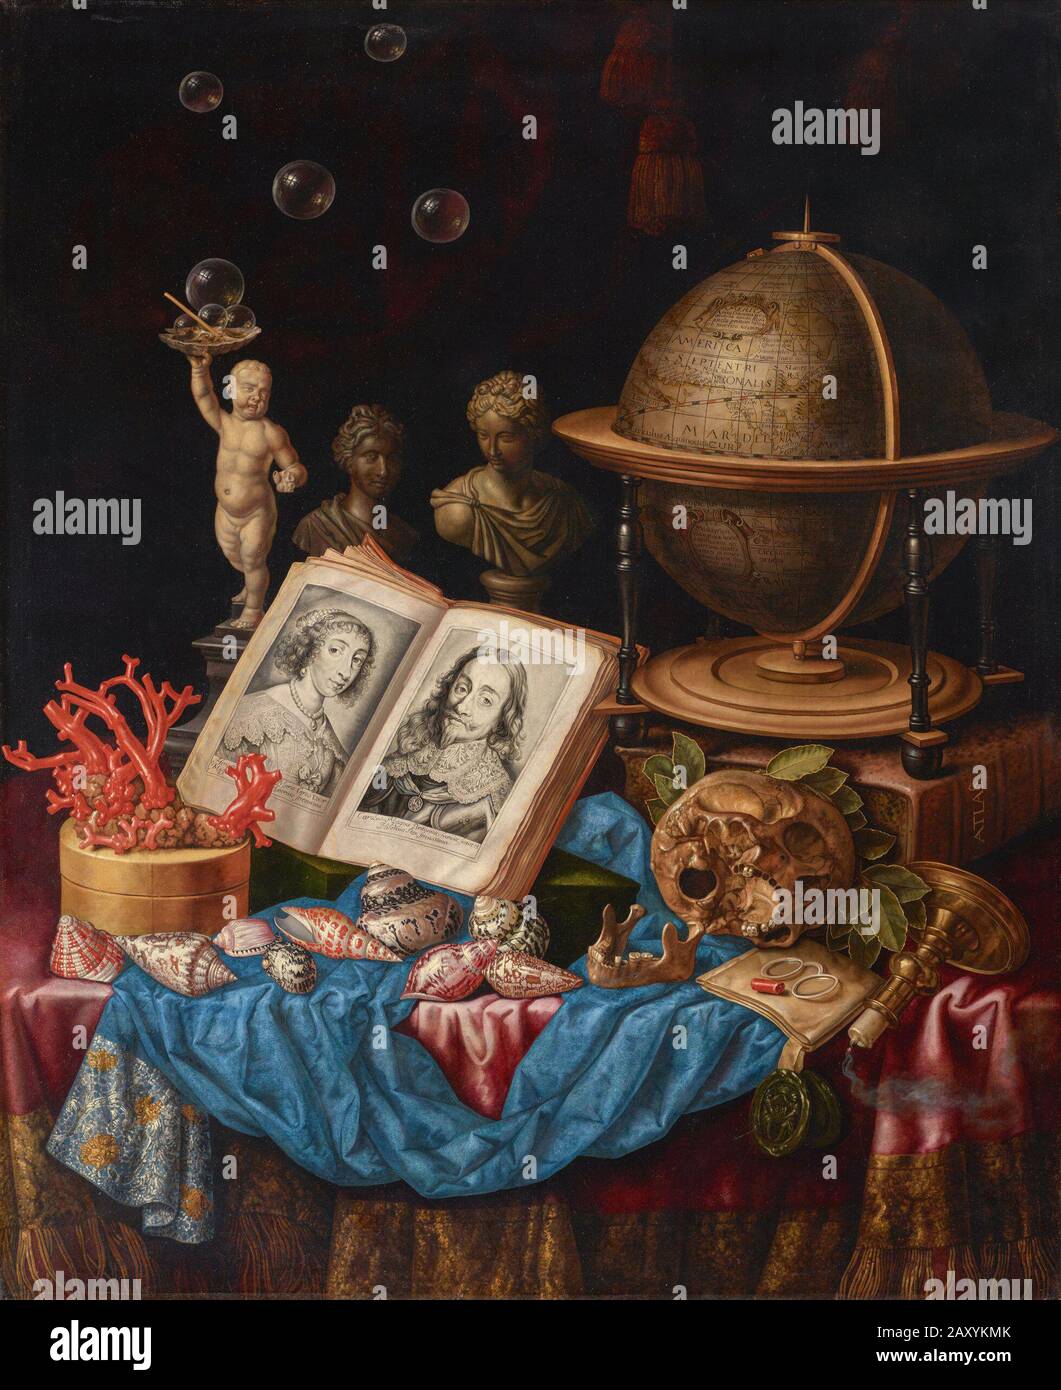 Allegory of Charles I of England and Henrietta of France in a Vanitas Still Life. Anonymous Flemish painter. oil on canvas. 1670s. Stock Photo